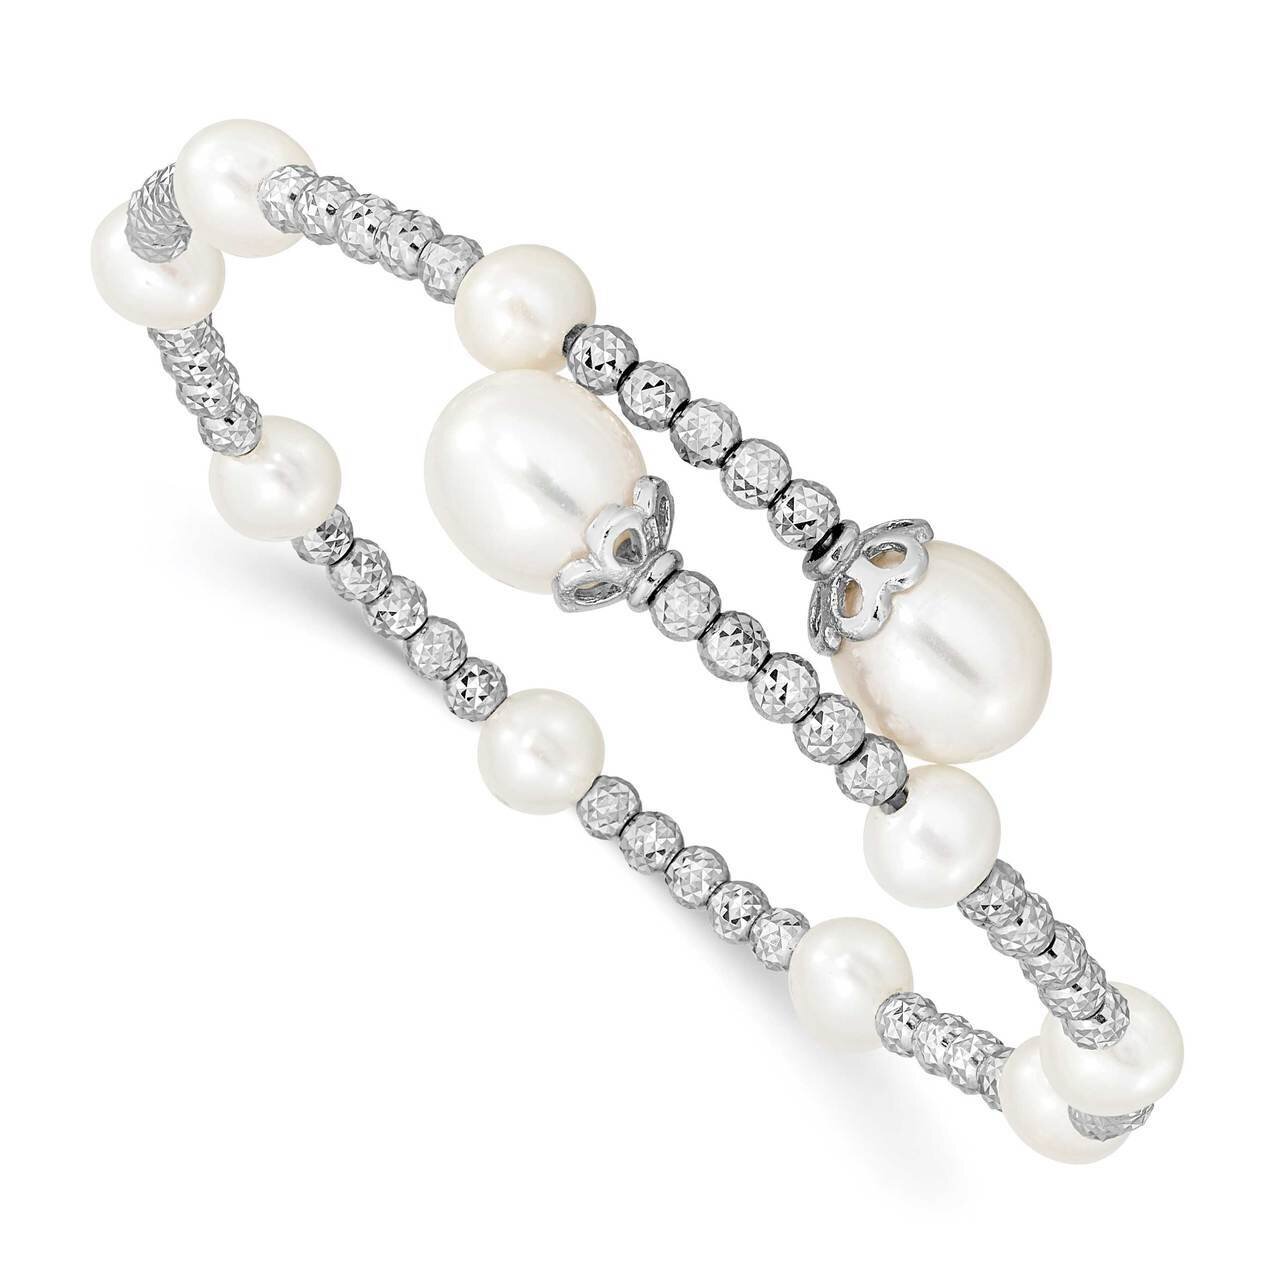 5-6mm and 8mm White Freshwater Cultured Pearl Coil Bangle Sterling Silver QG5103